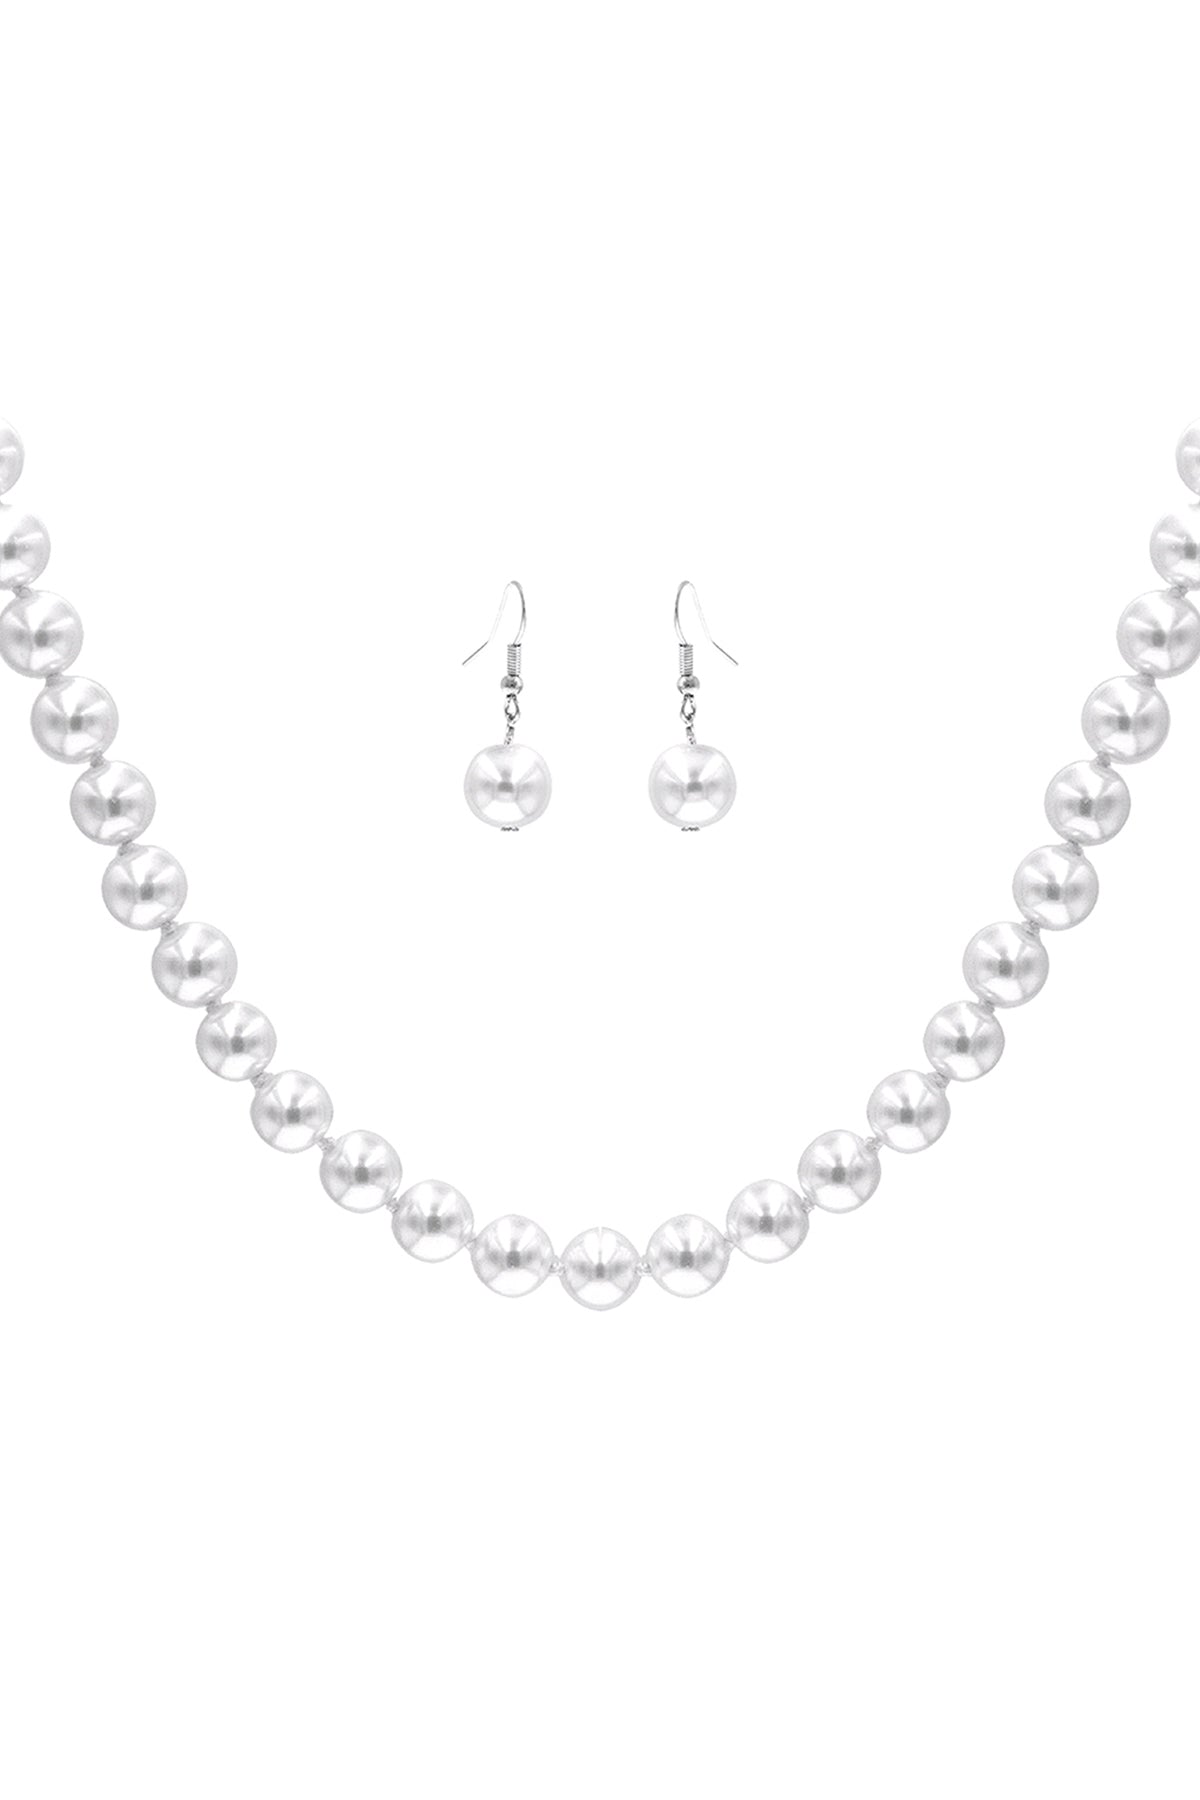 12MM PEARL KNOTTING 15IN NEKCLACE AND EARRING SET